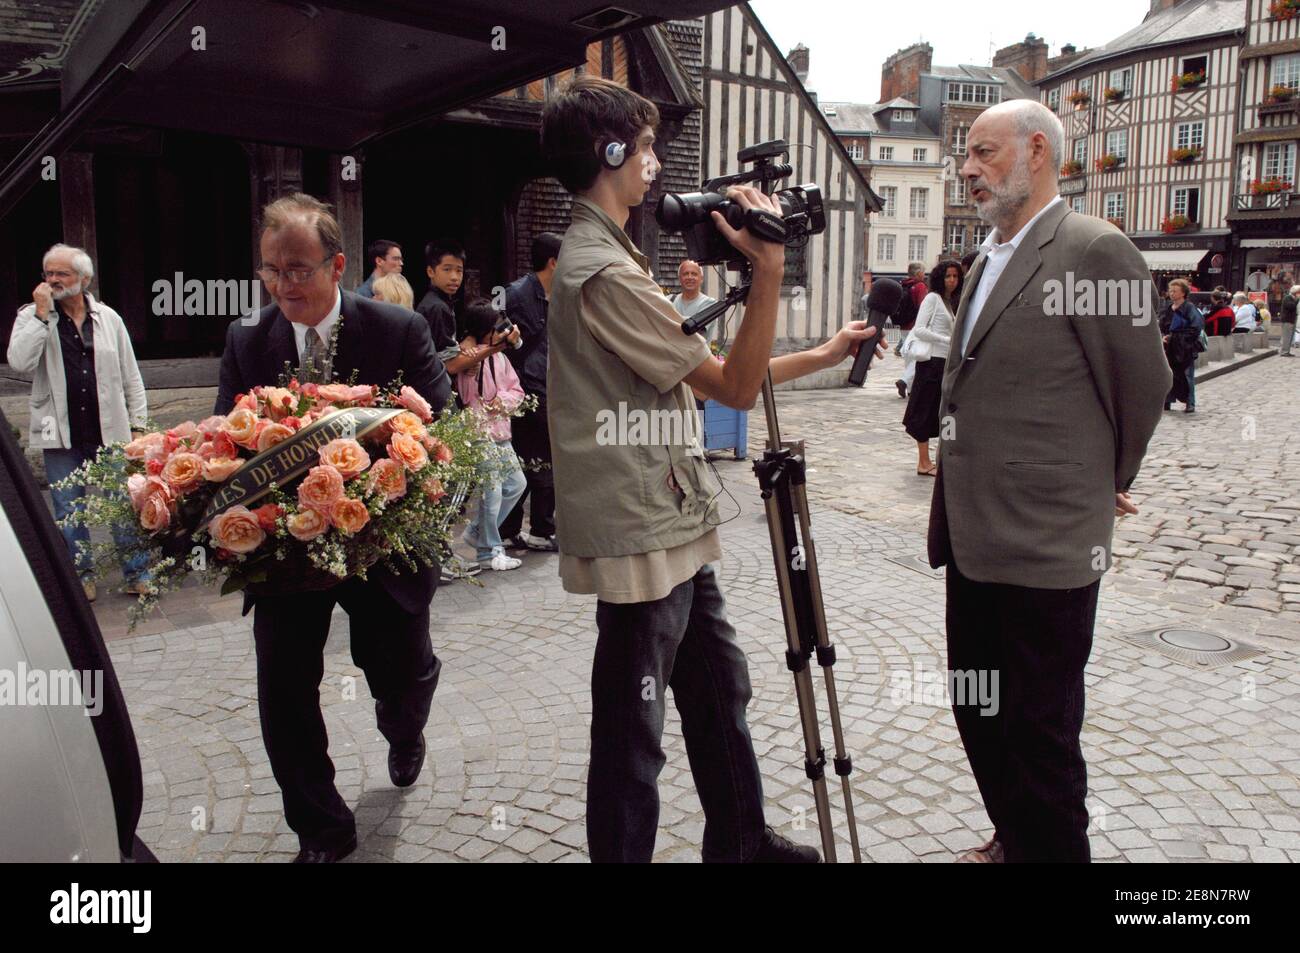 Director Bertrand Blier speaks to the media as he arrives for the funeral mass of actor Michel Serrault, held at the Sainte-Catherine church in Honfleur, France on August 2, 2007. Photo by Khayat-Mousse/ABACAPRESS.COM Stock Photo